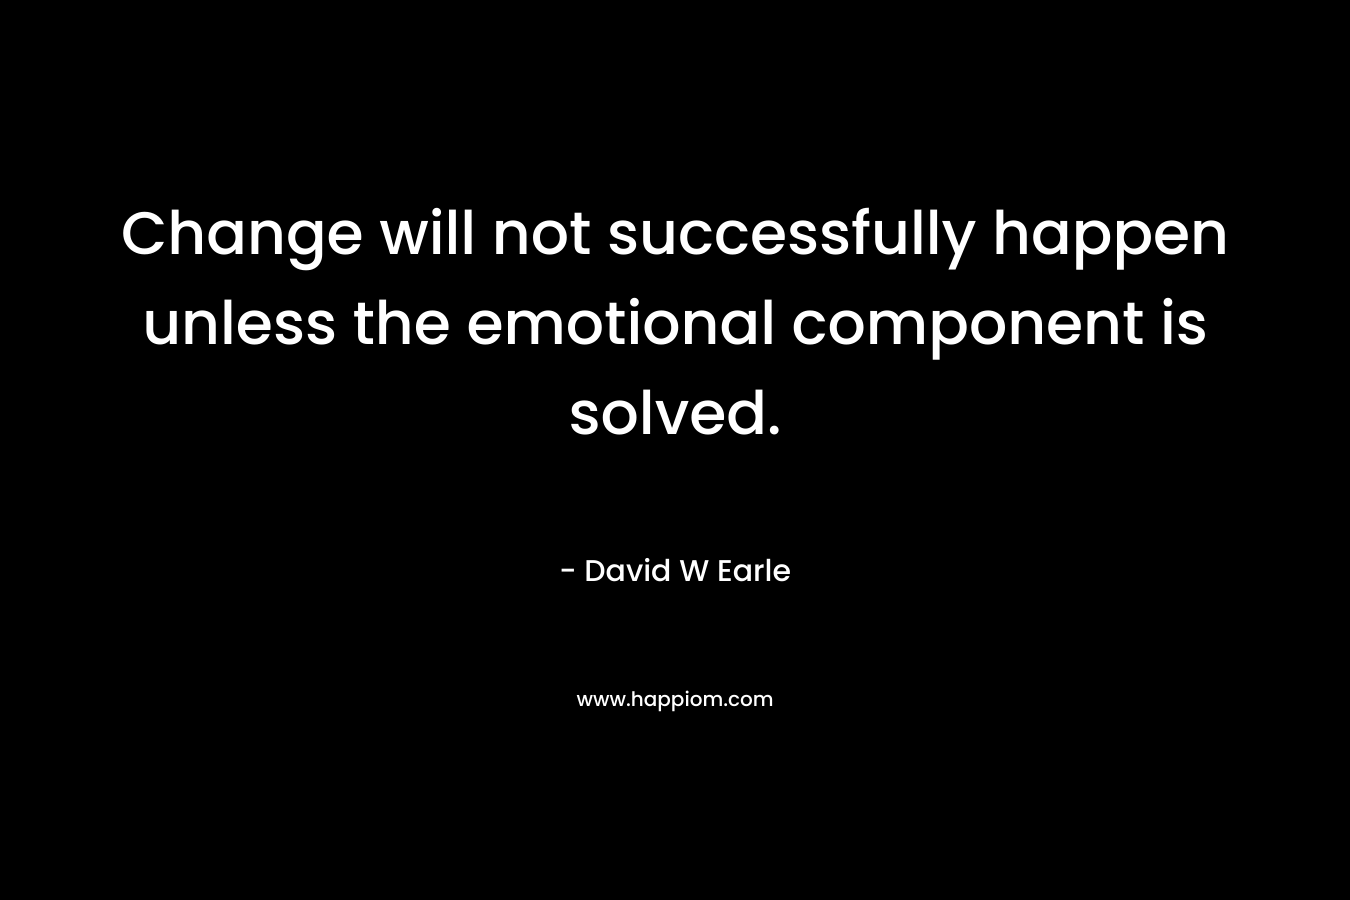 Change will not successfully happen unless the emotional component is solved. – David W Earle